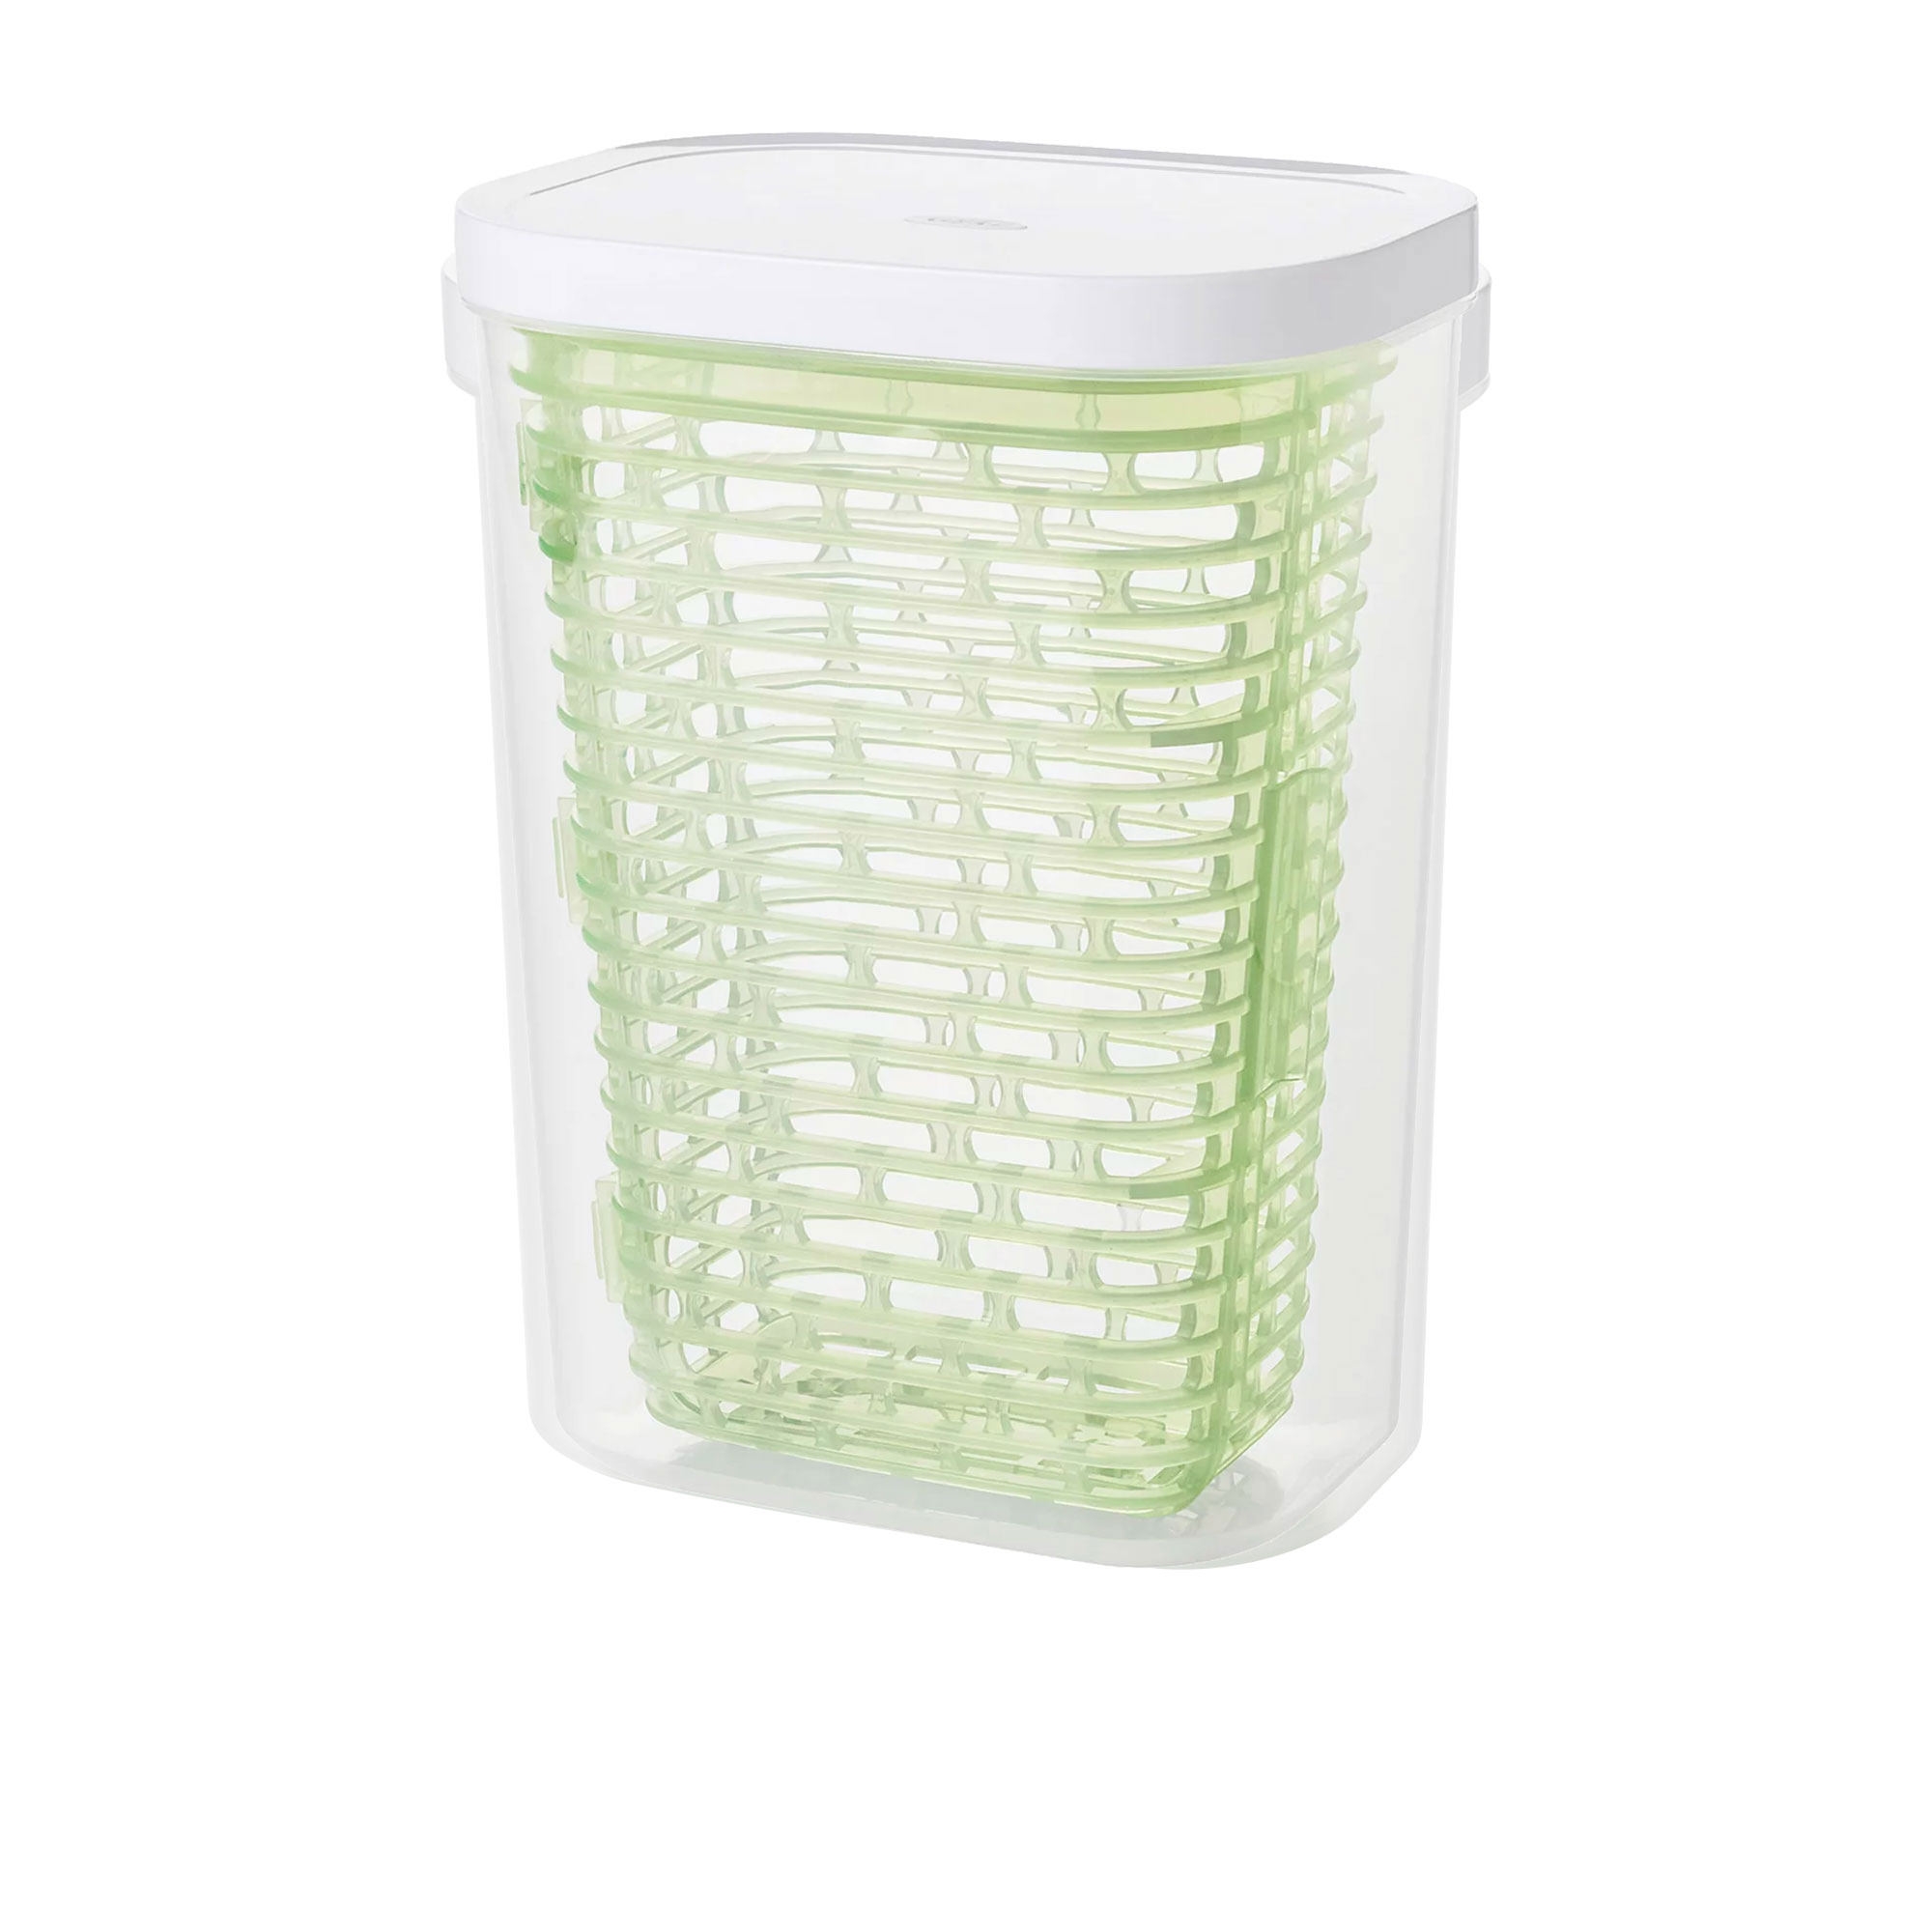 OXO Good Grips GreenSaver Herb Keeper 2.6L Image 1